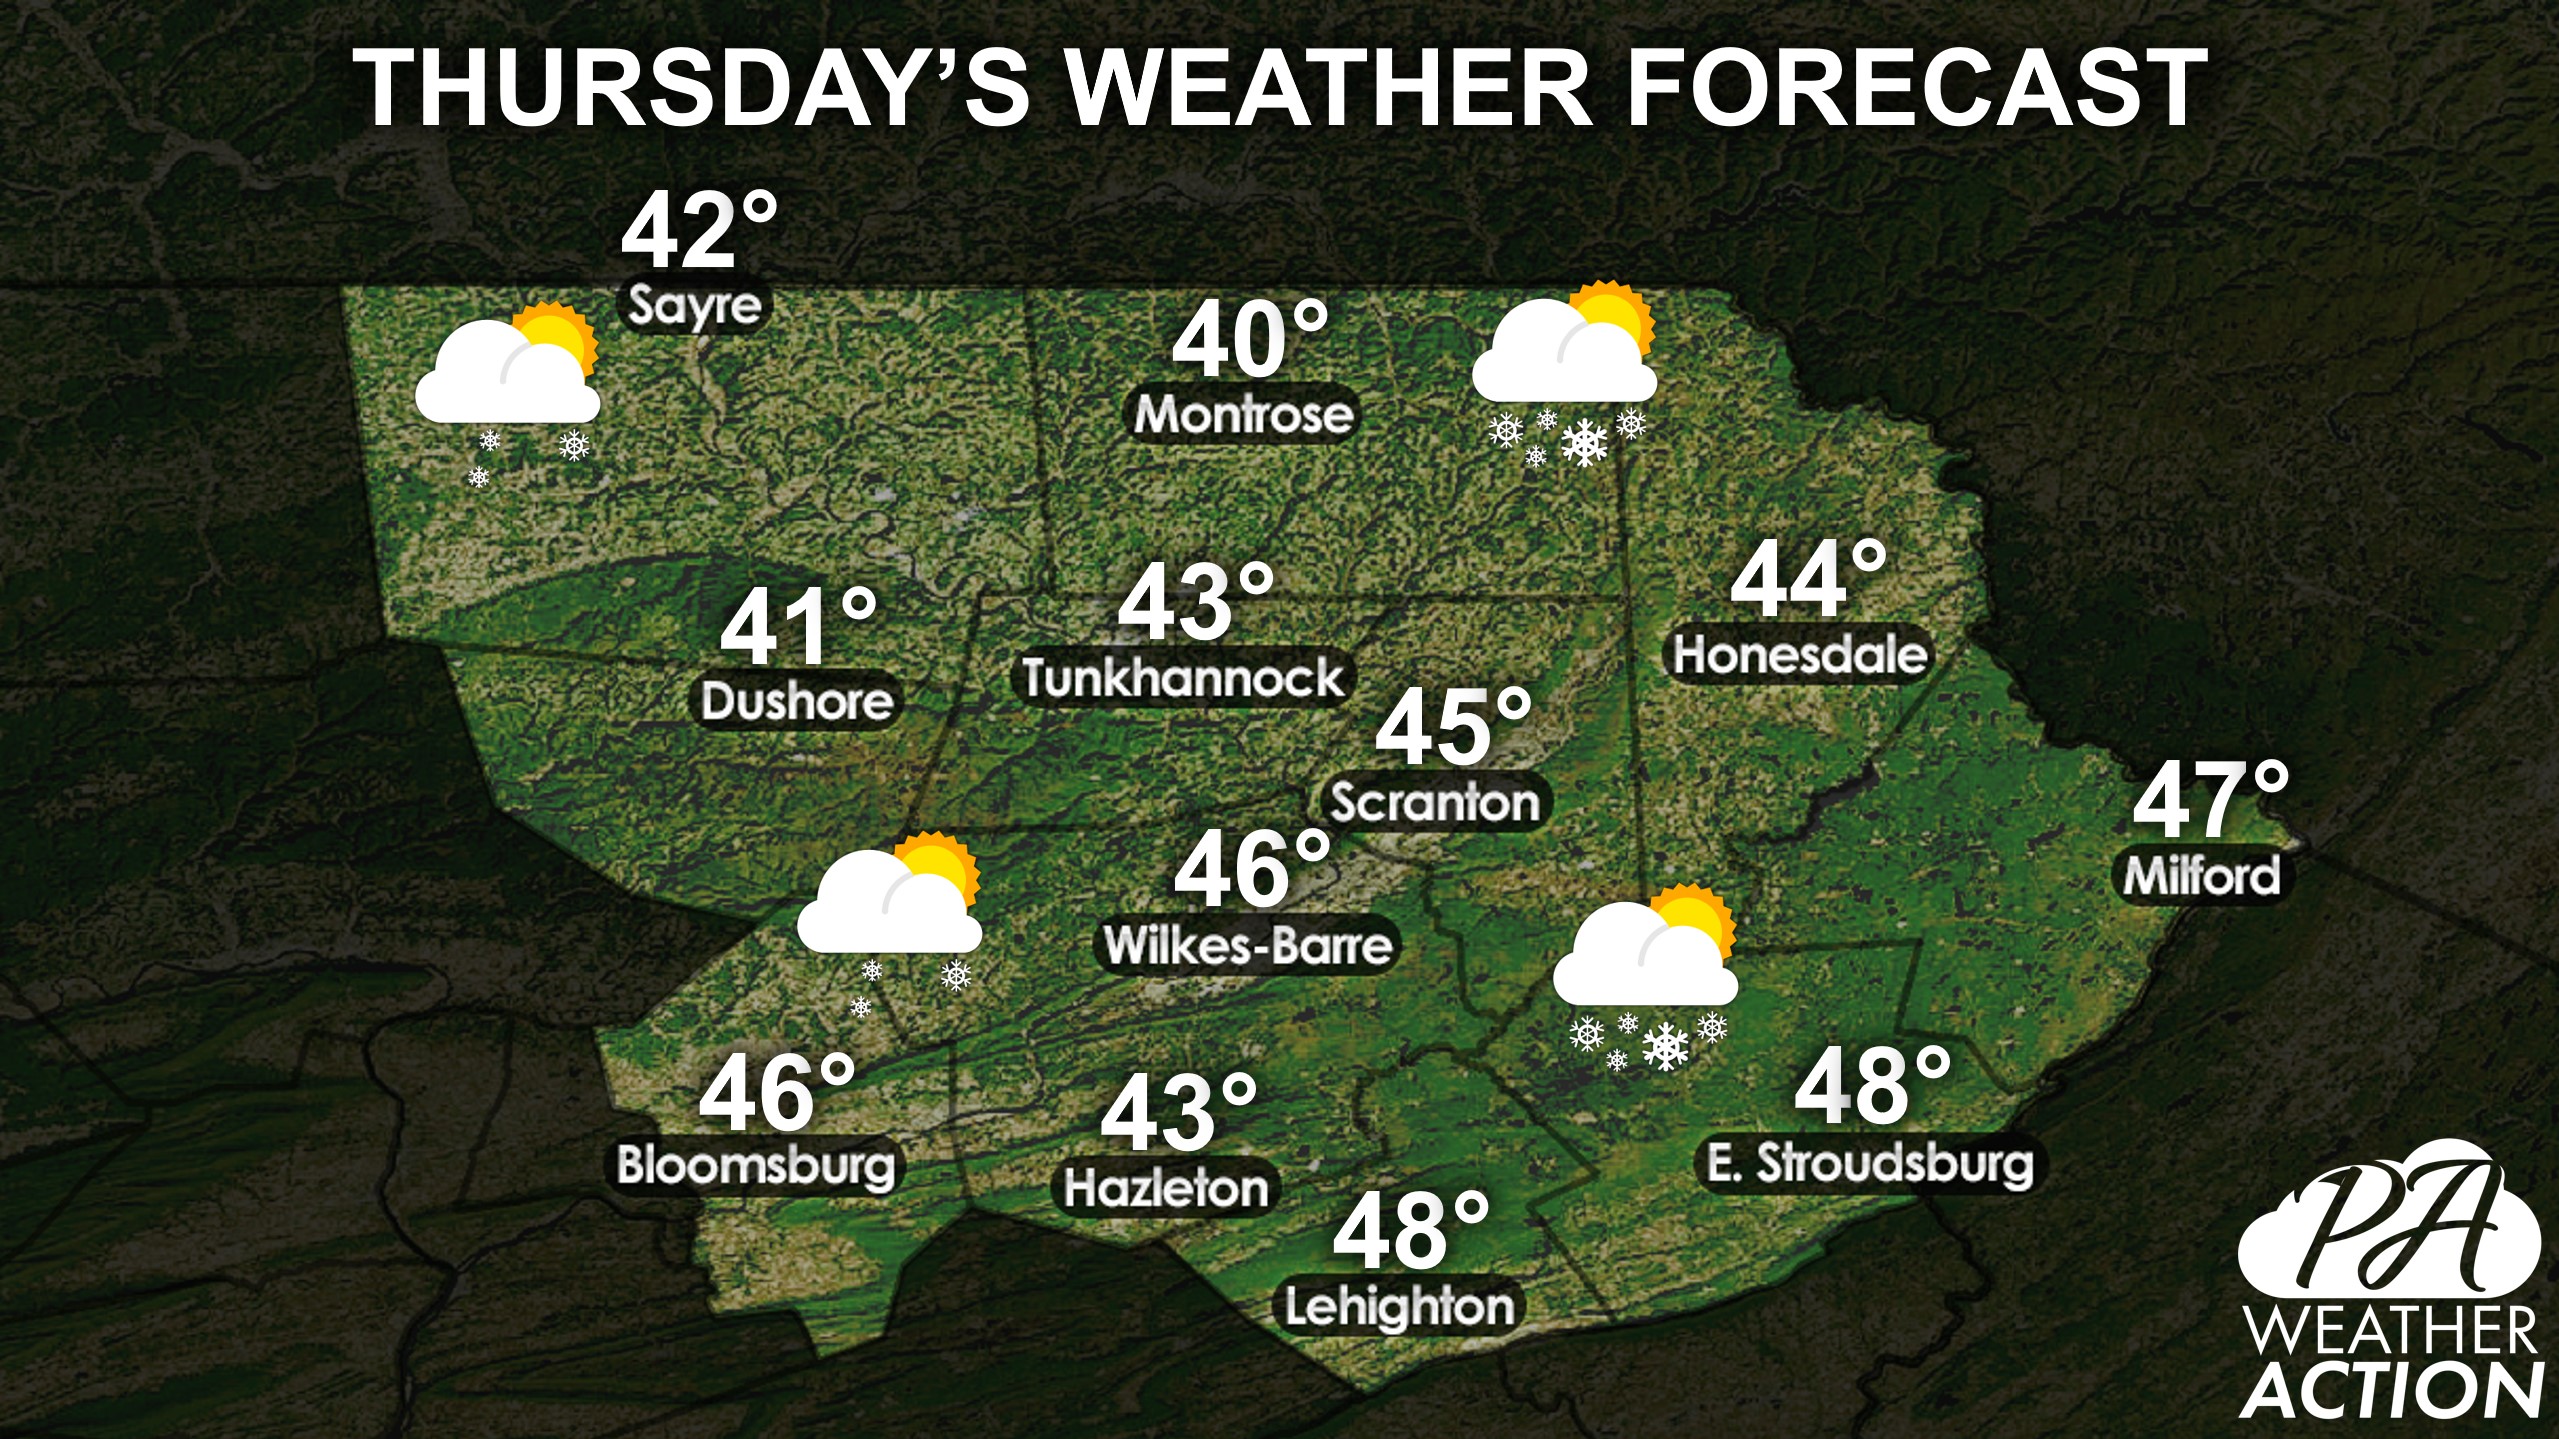 NEPA Daily Forecast for Thursday, April 1st, 2021 PA Weather Action